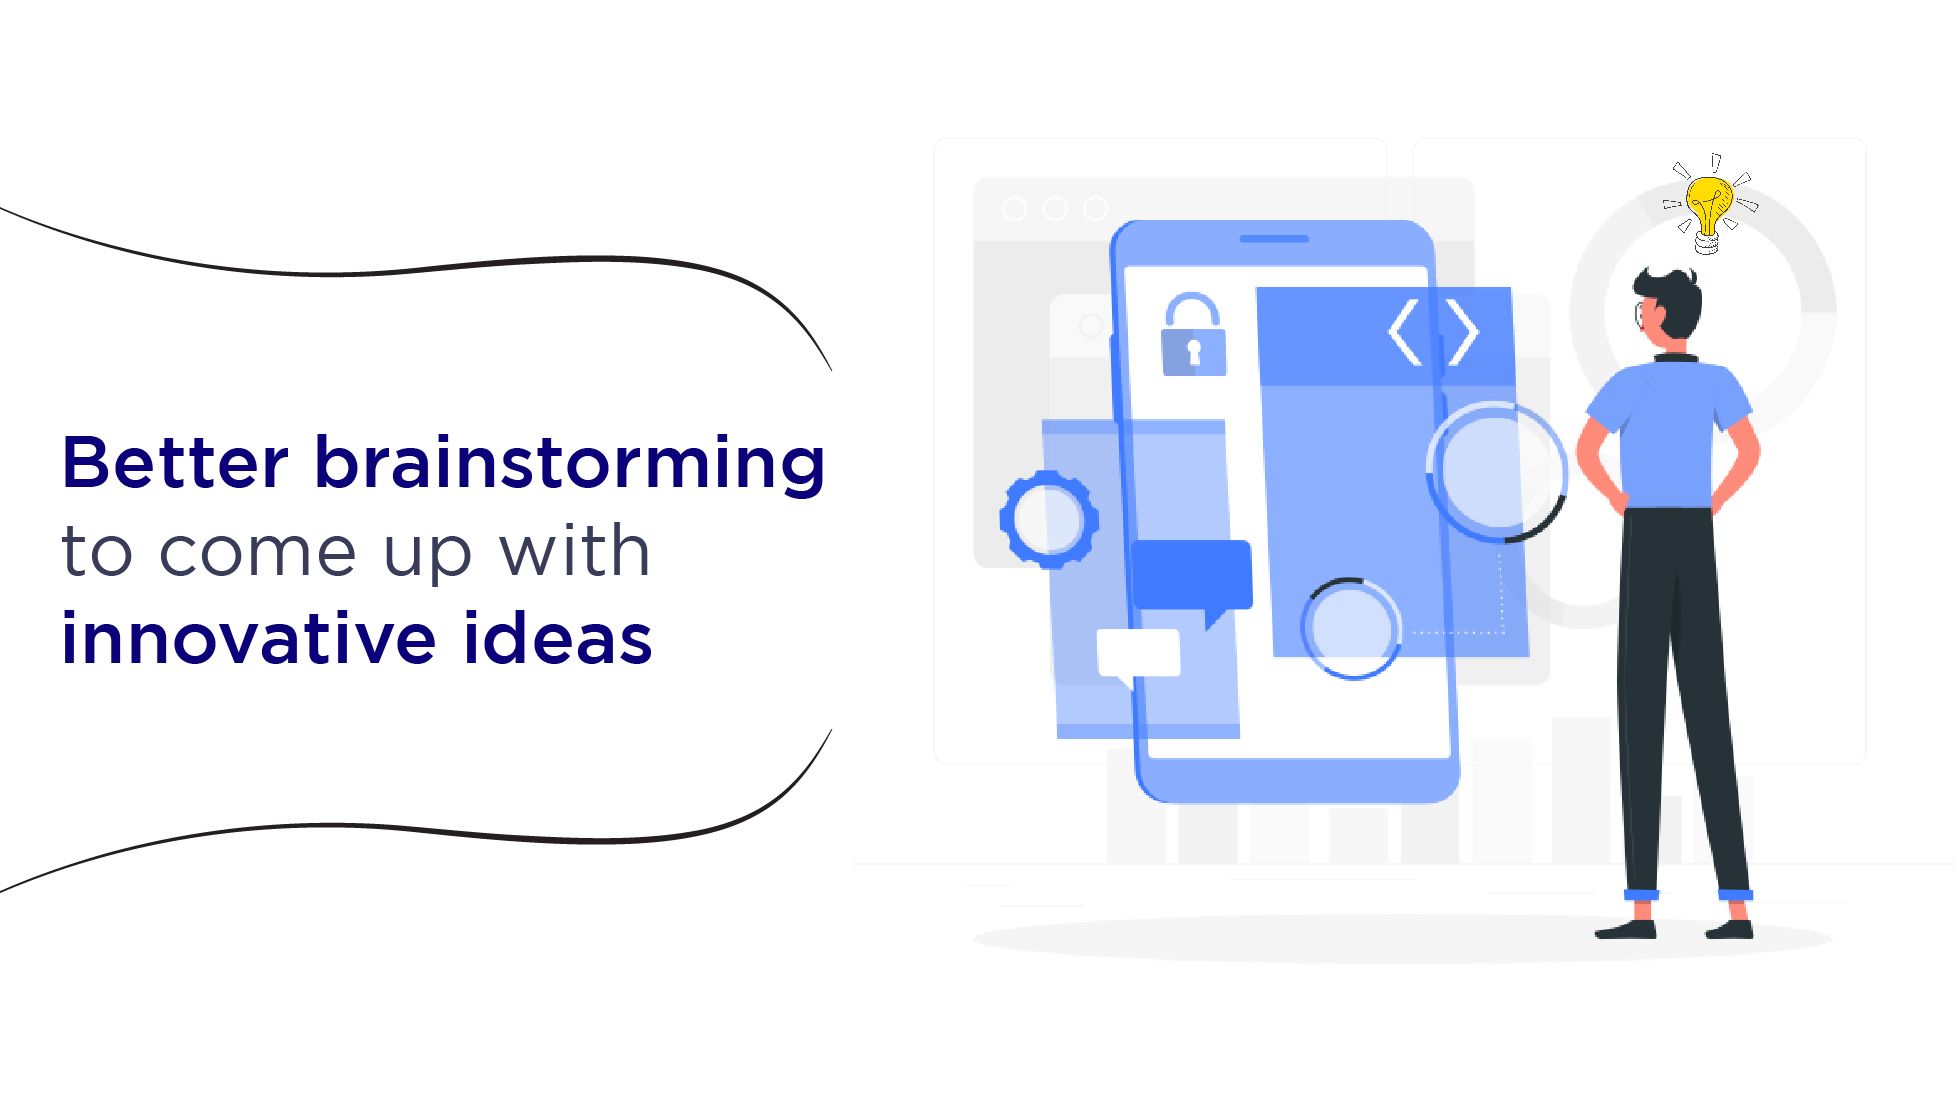 Better brainstorming to come up with innovative ideas